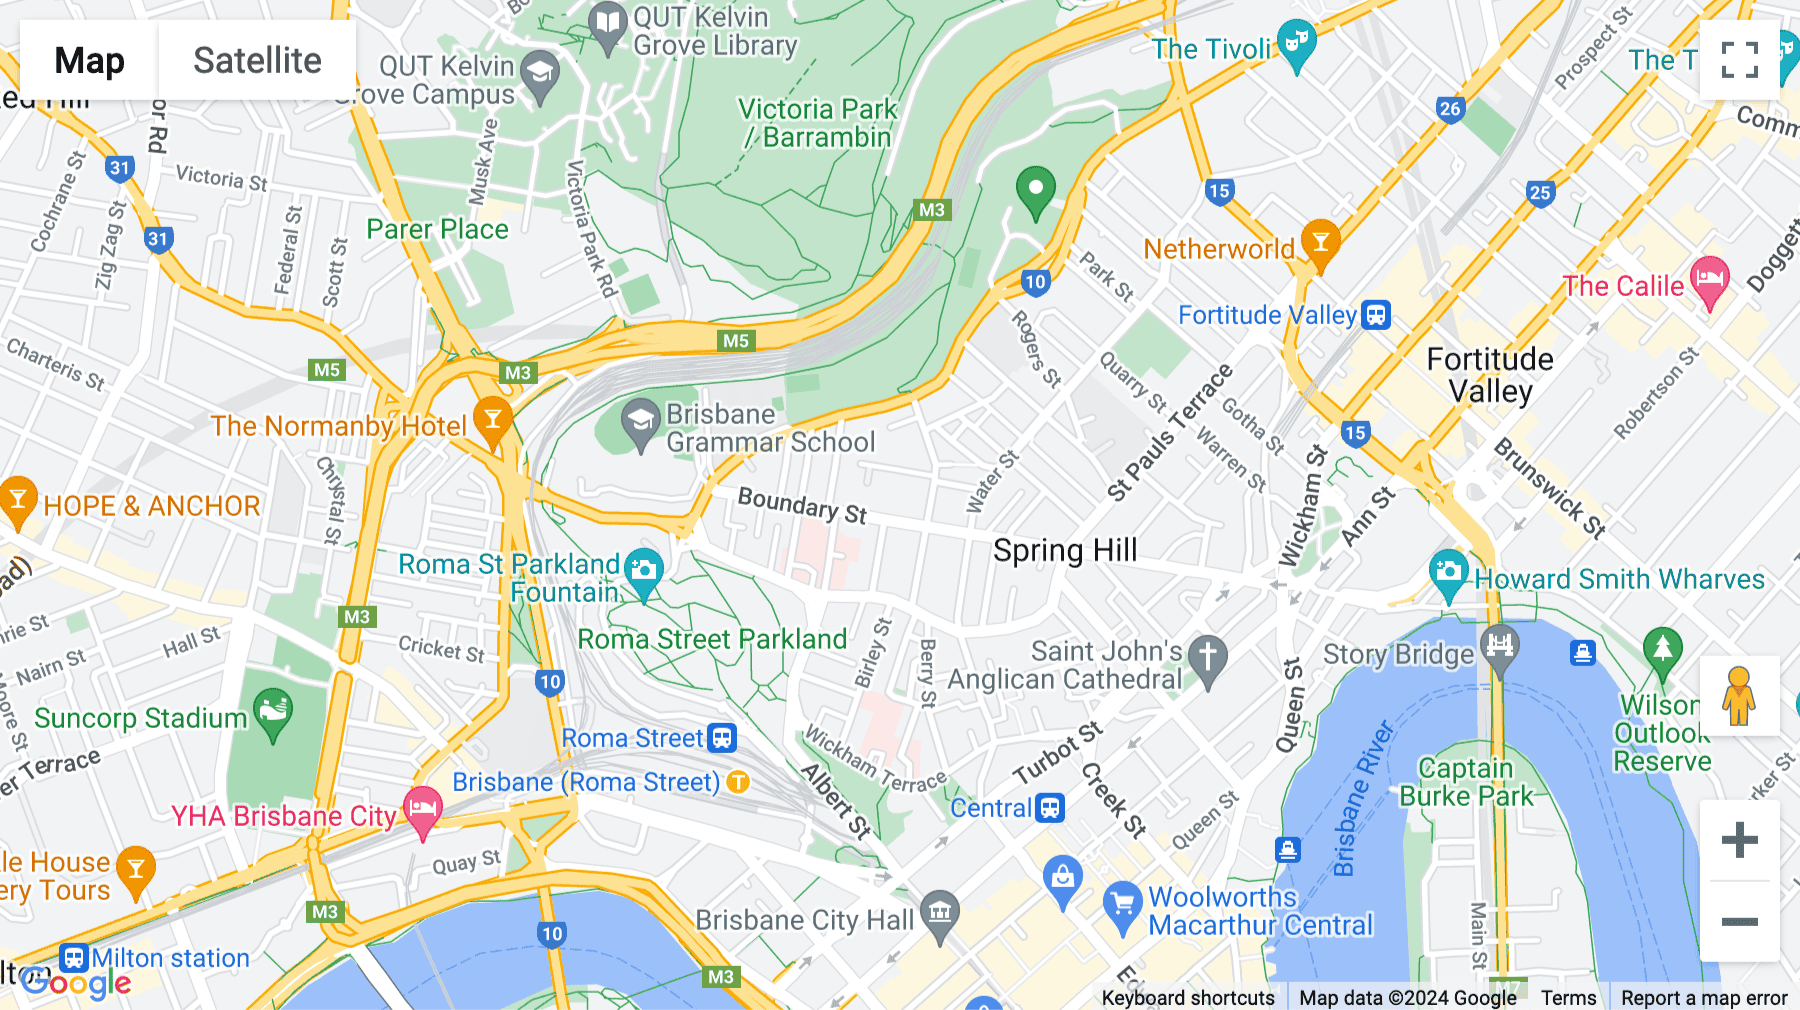 Click for interative map of The Johnson, 477 Boundary Street, Spring Hill, Brisbane